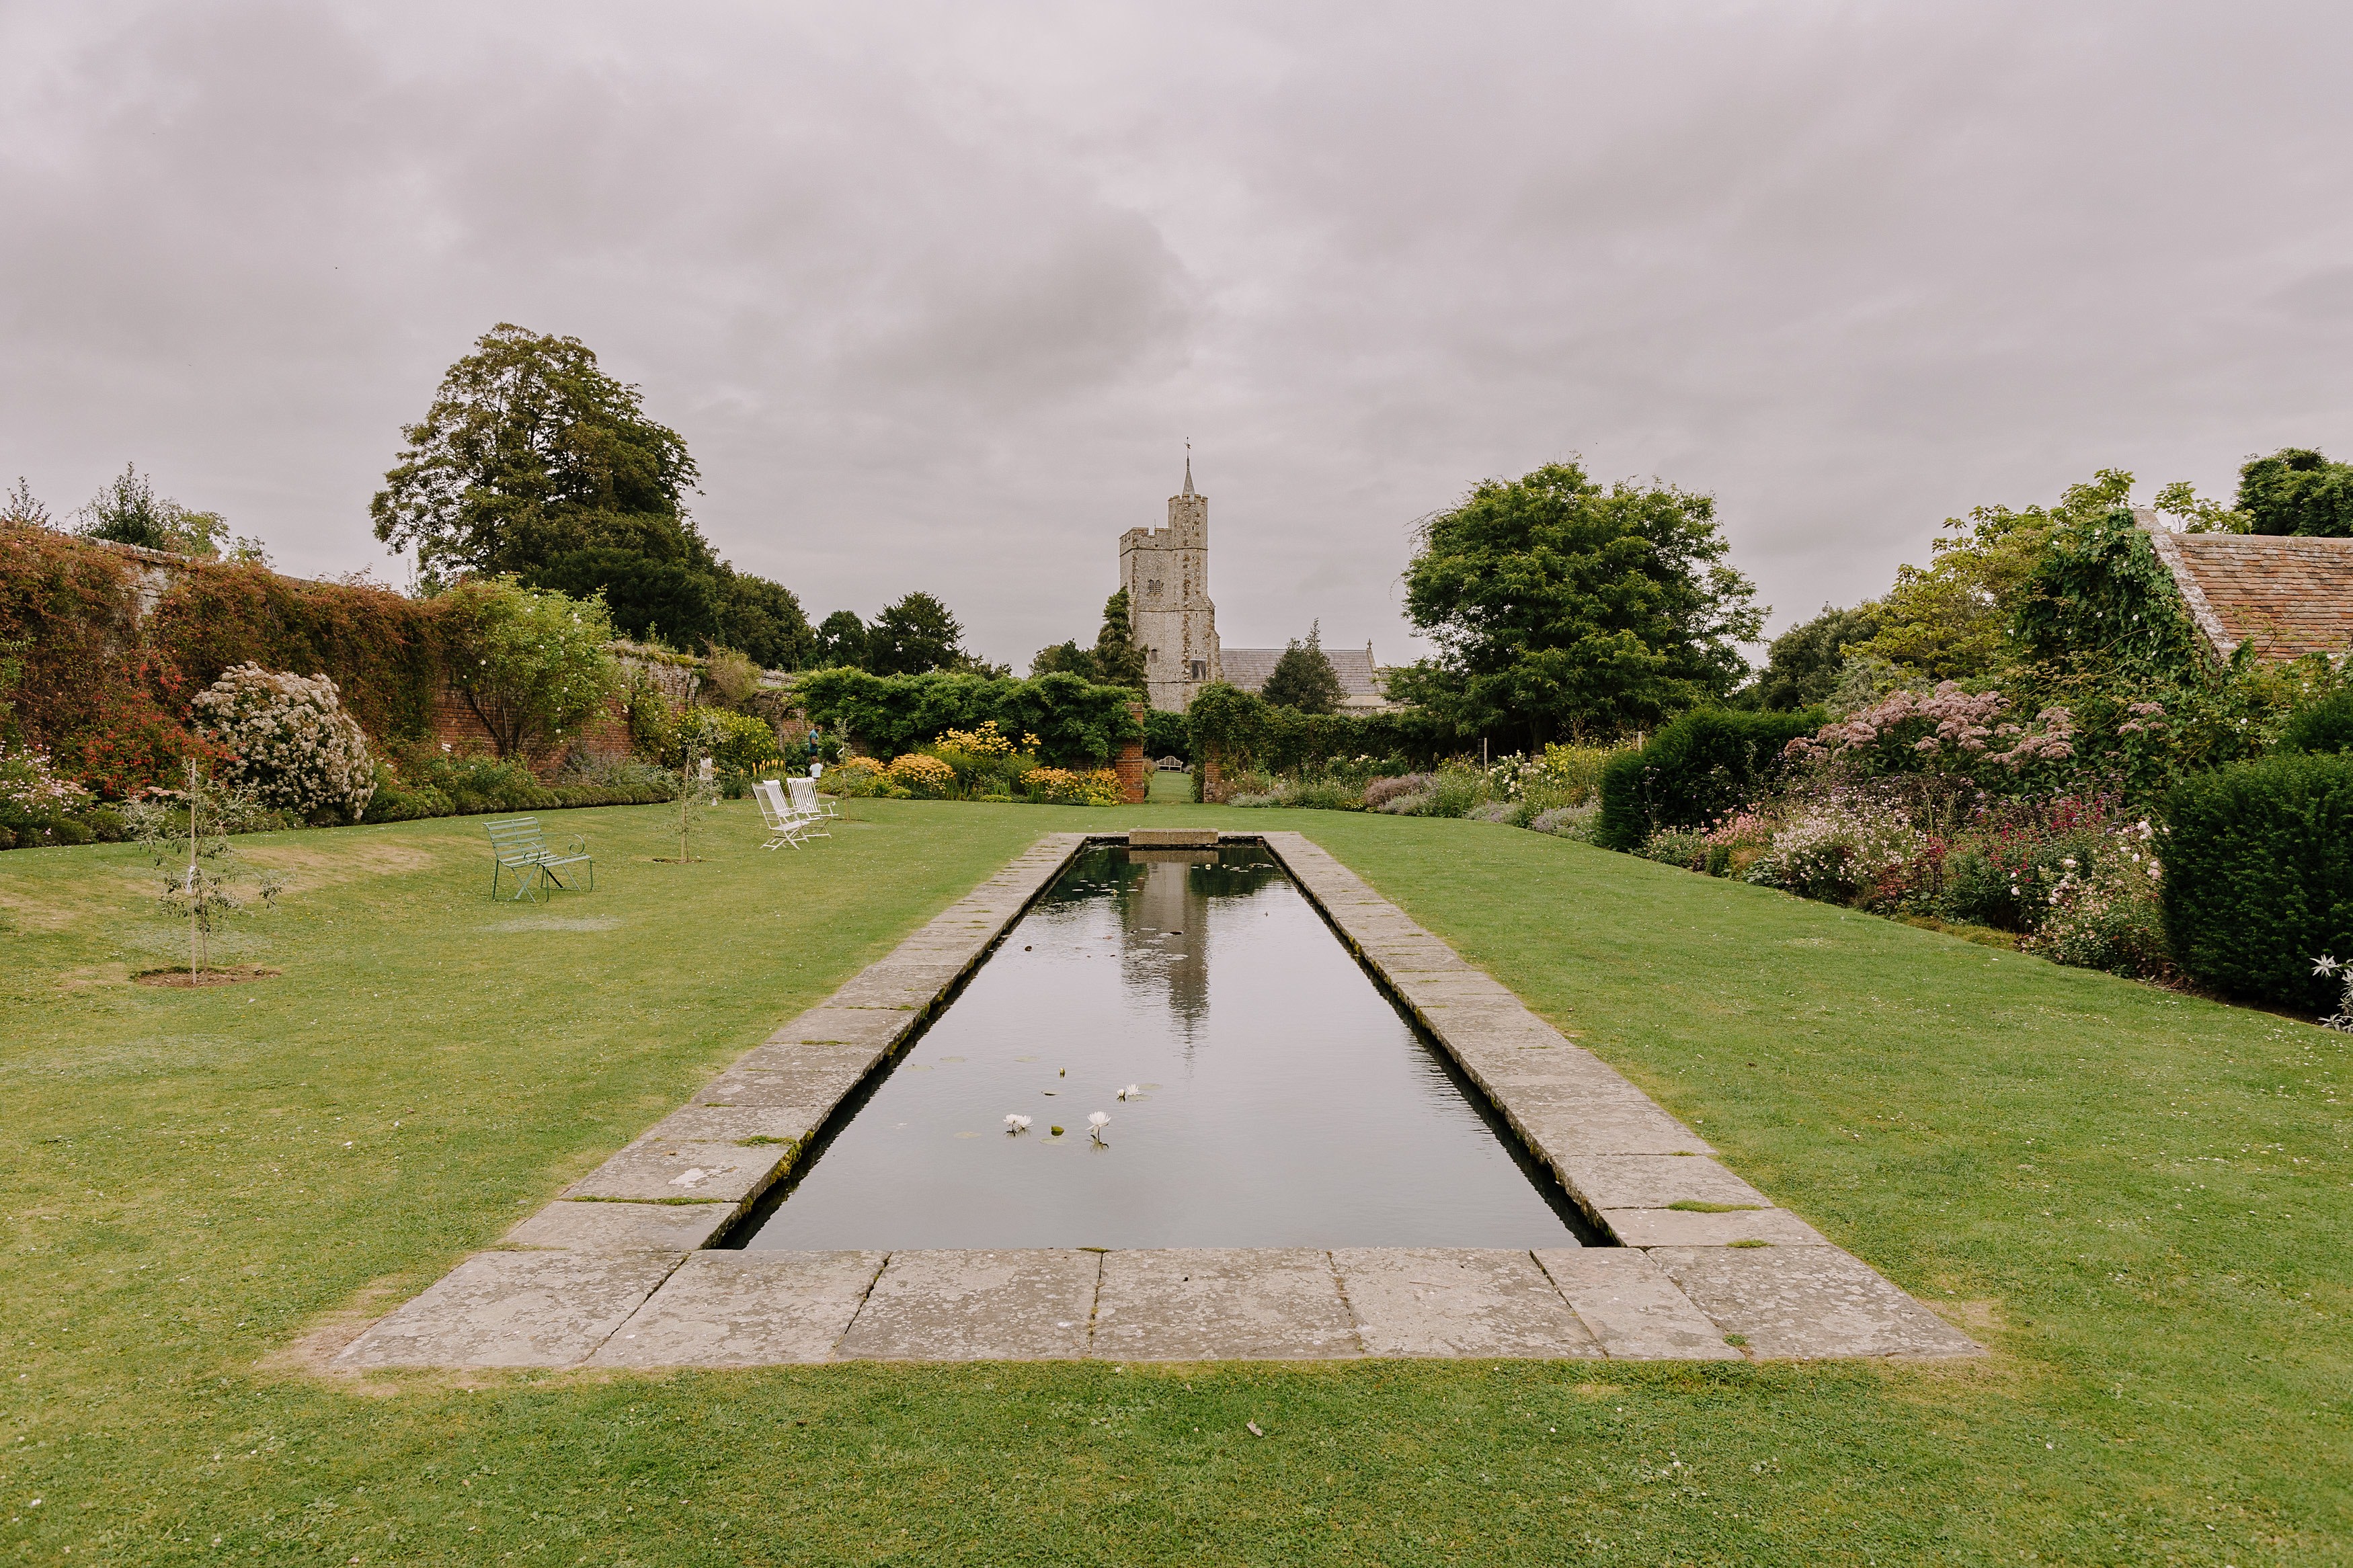 Ornamental pond in the walled garden with The Church of Holy Cross in the background